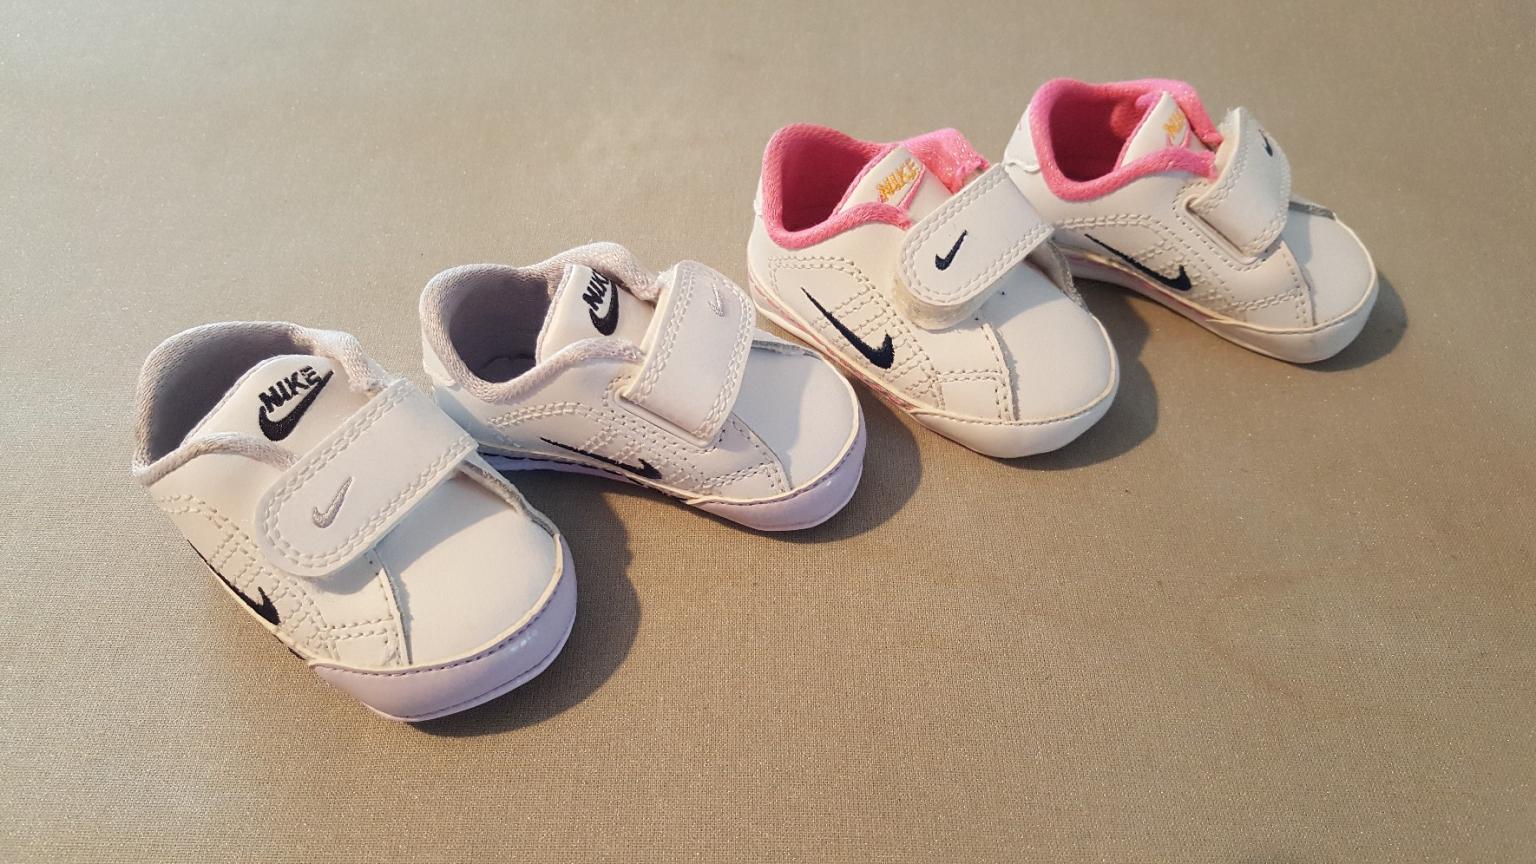 size 0 nike baby shoes